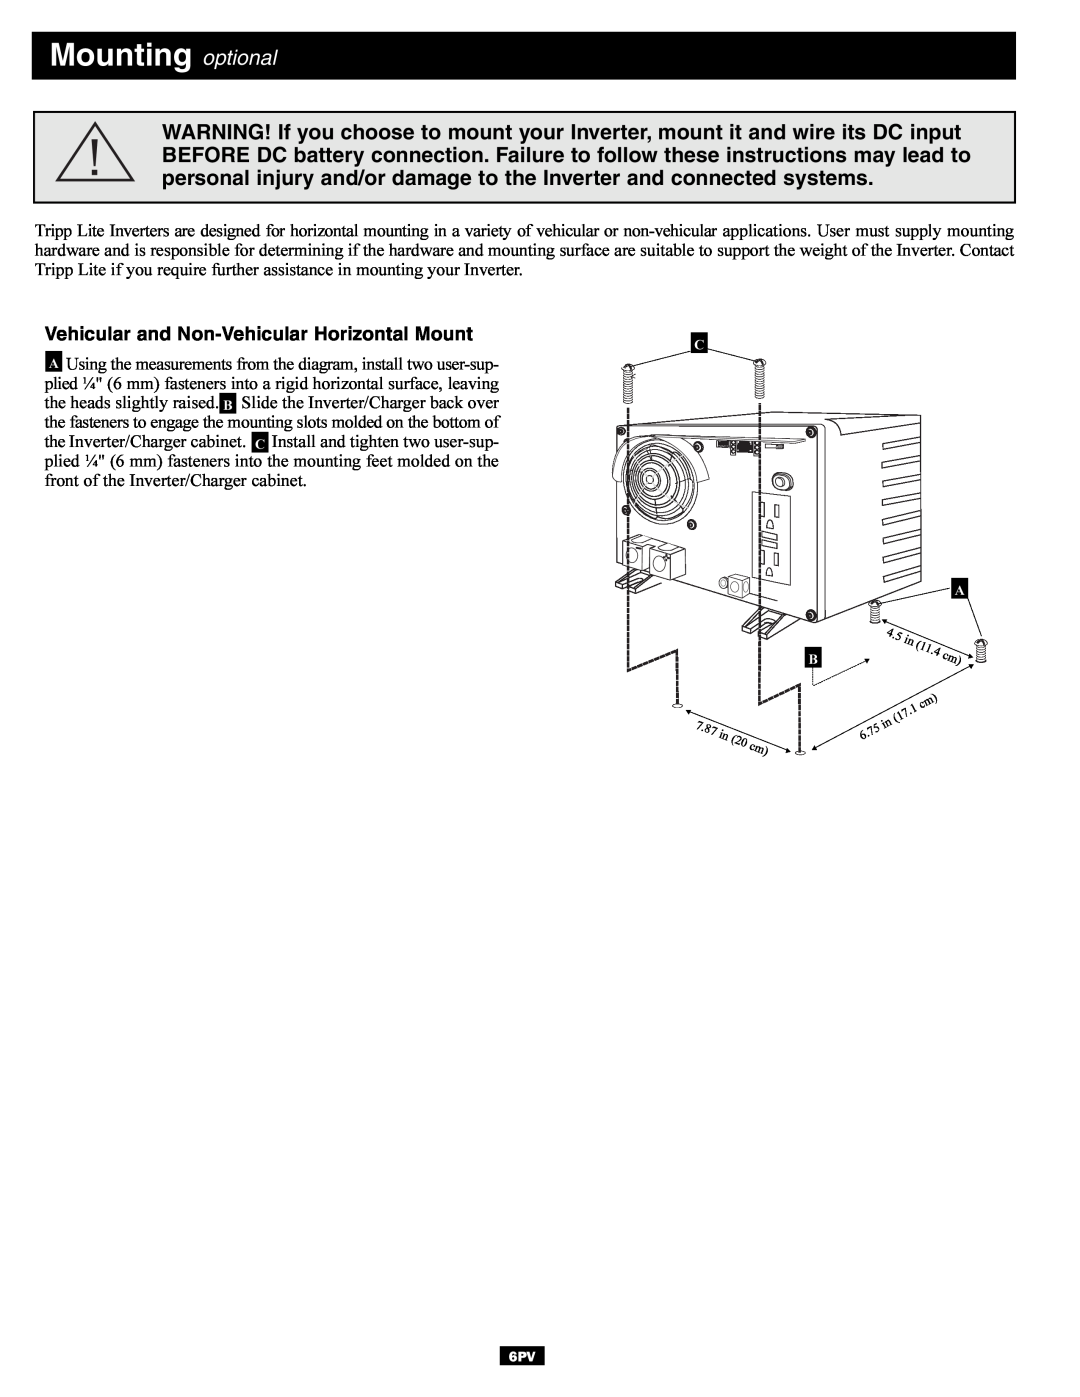 Tripp Lite DC-to-AC Inverter owner manual Mounting optional, Vehicular and Non-Vehicular Horizontal Mount 